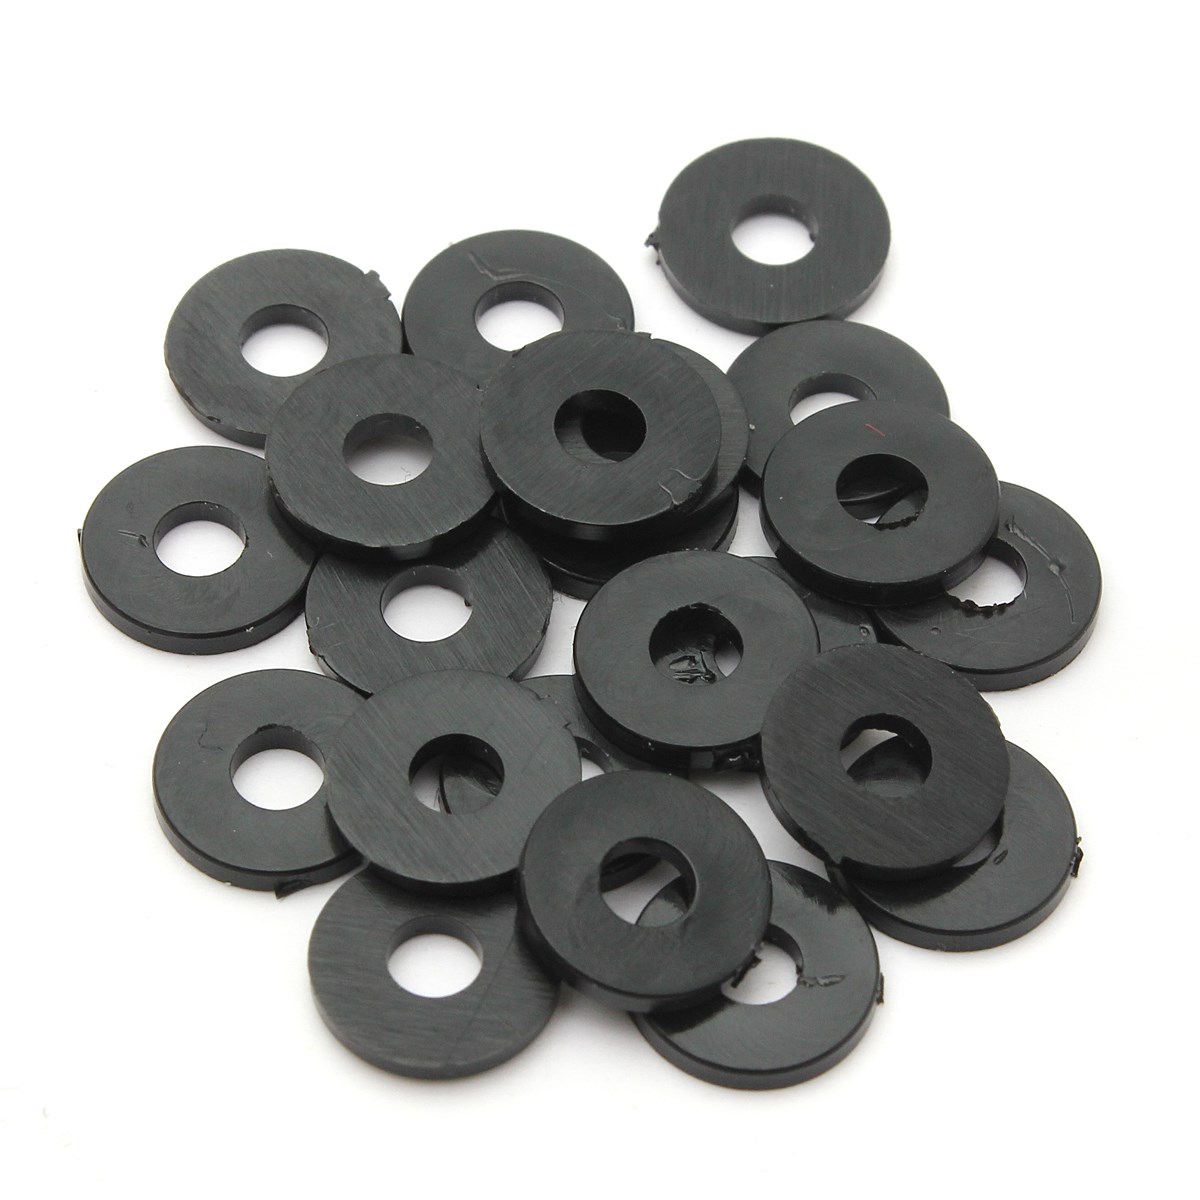 Nylon Washers And Spacers 99